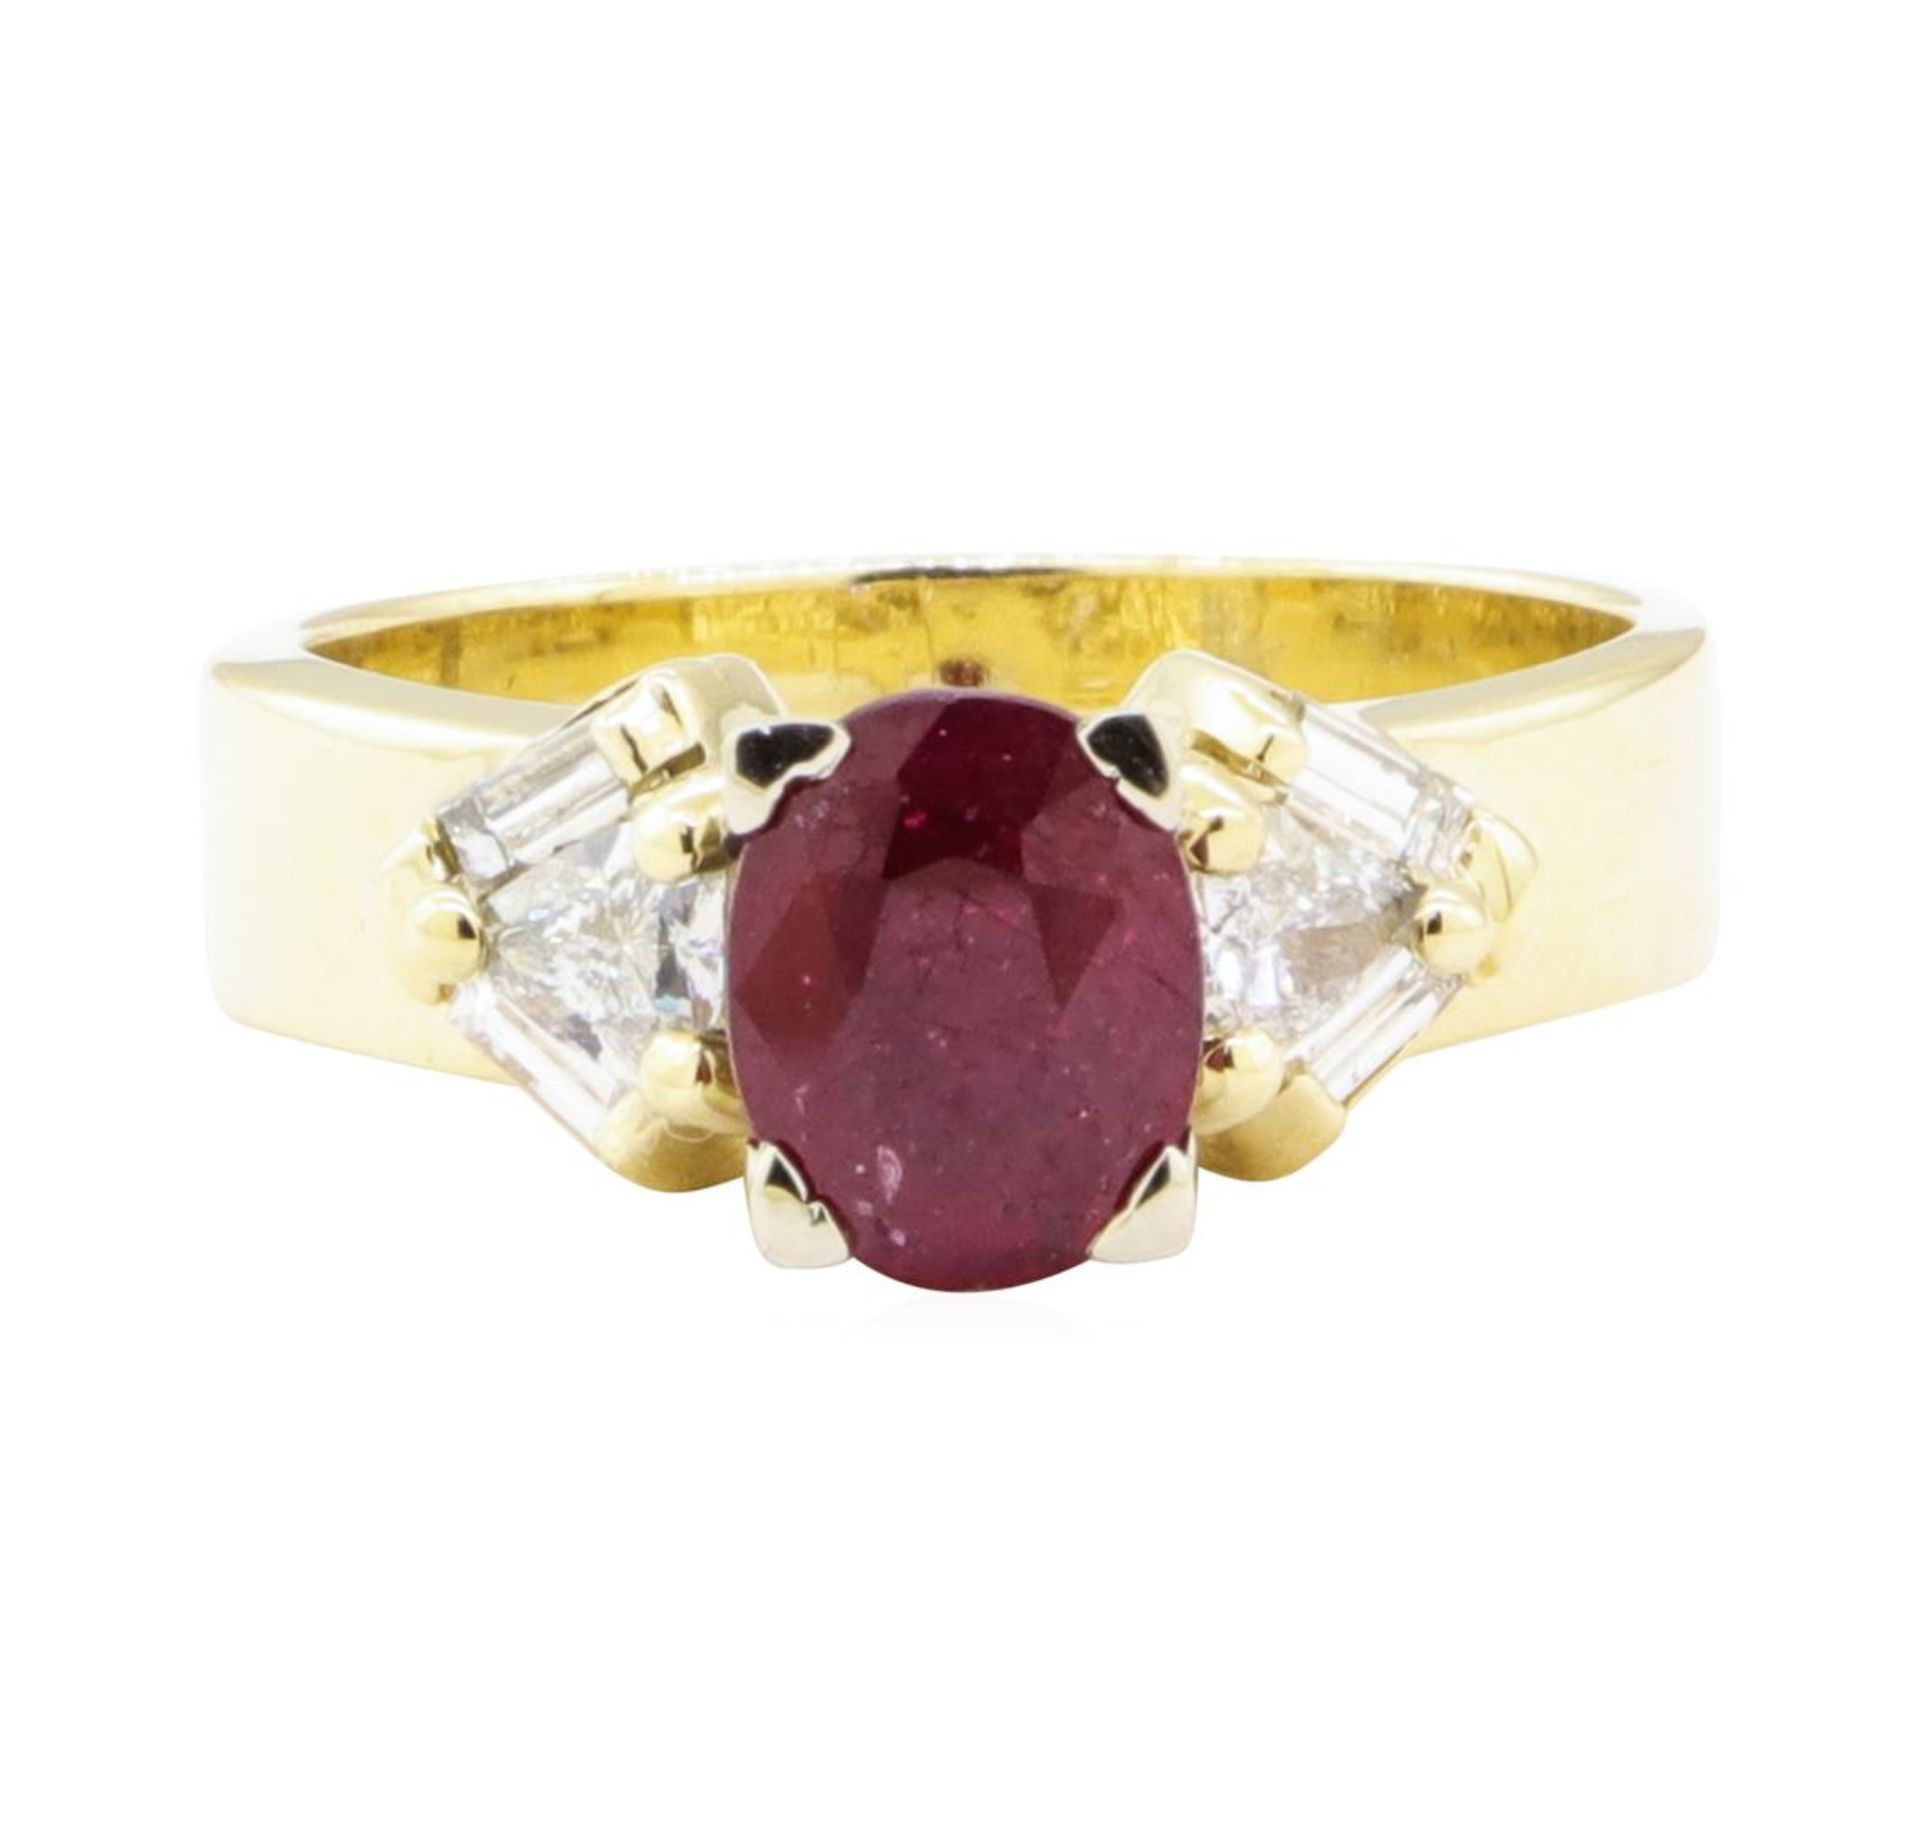 1.91ctw Ruby and Diamond Ring - 14KT Yellow Gold - Image 2 of 4